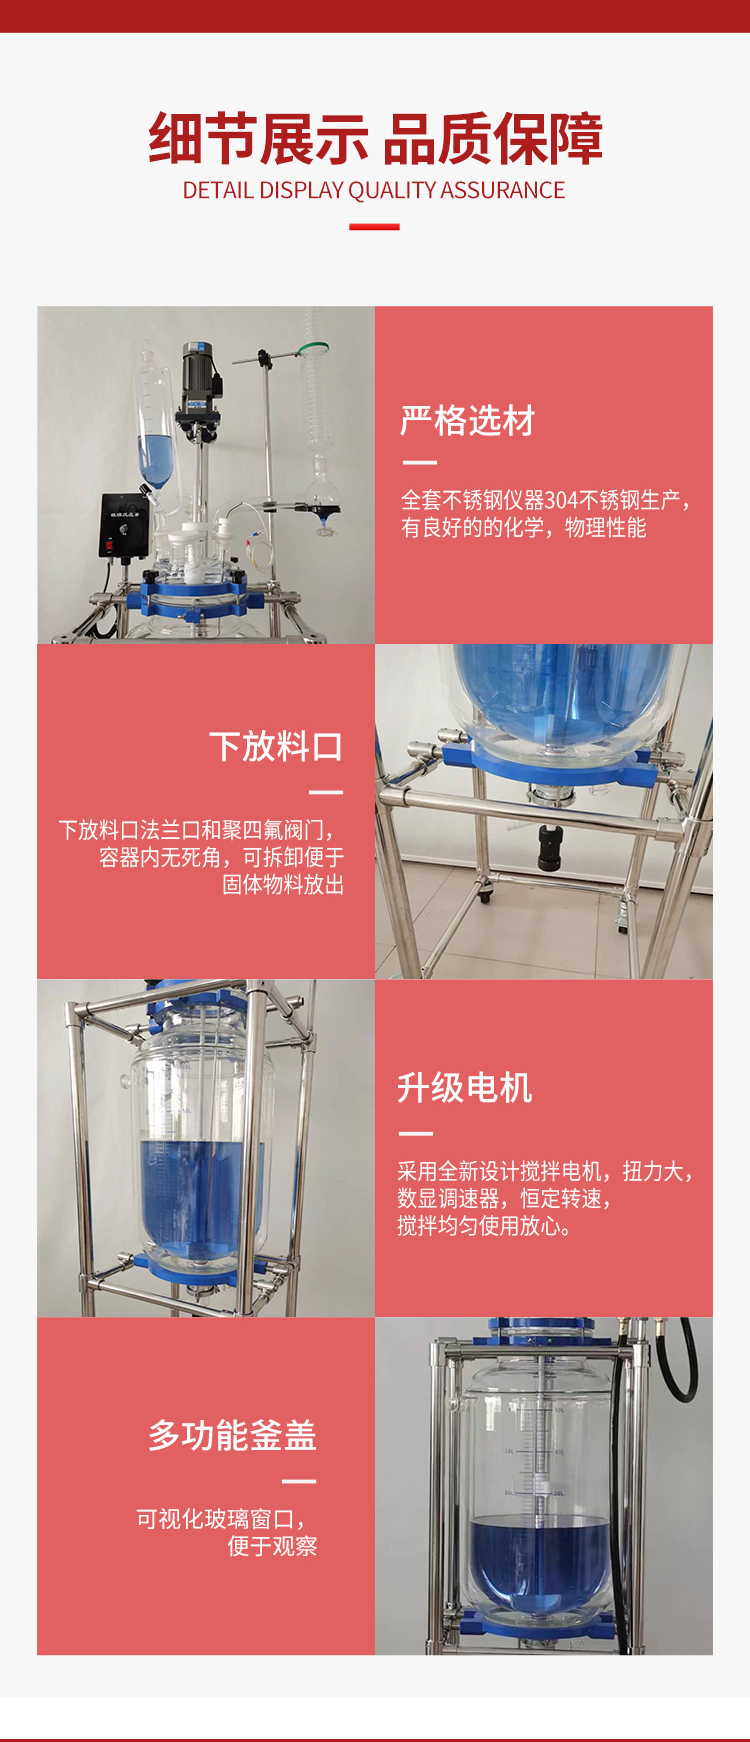 Explosion proof glass reaction kettle, explosion-proof motor control box, mixing paddle, optional for discharge without liquid accumulation